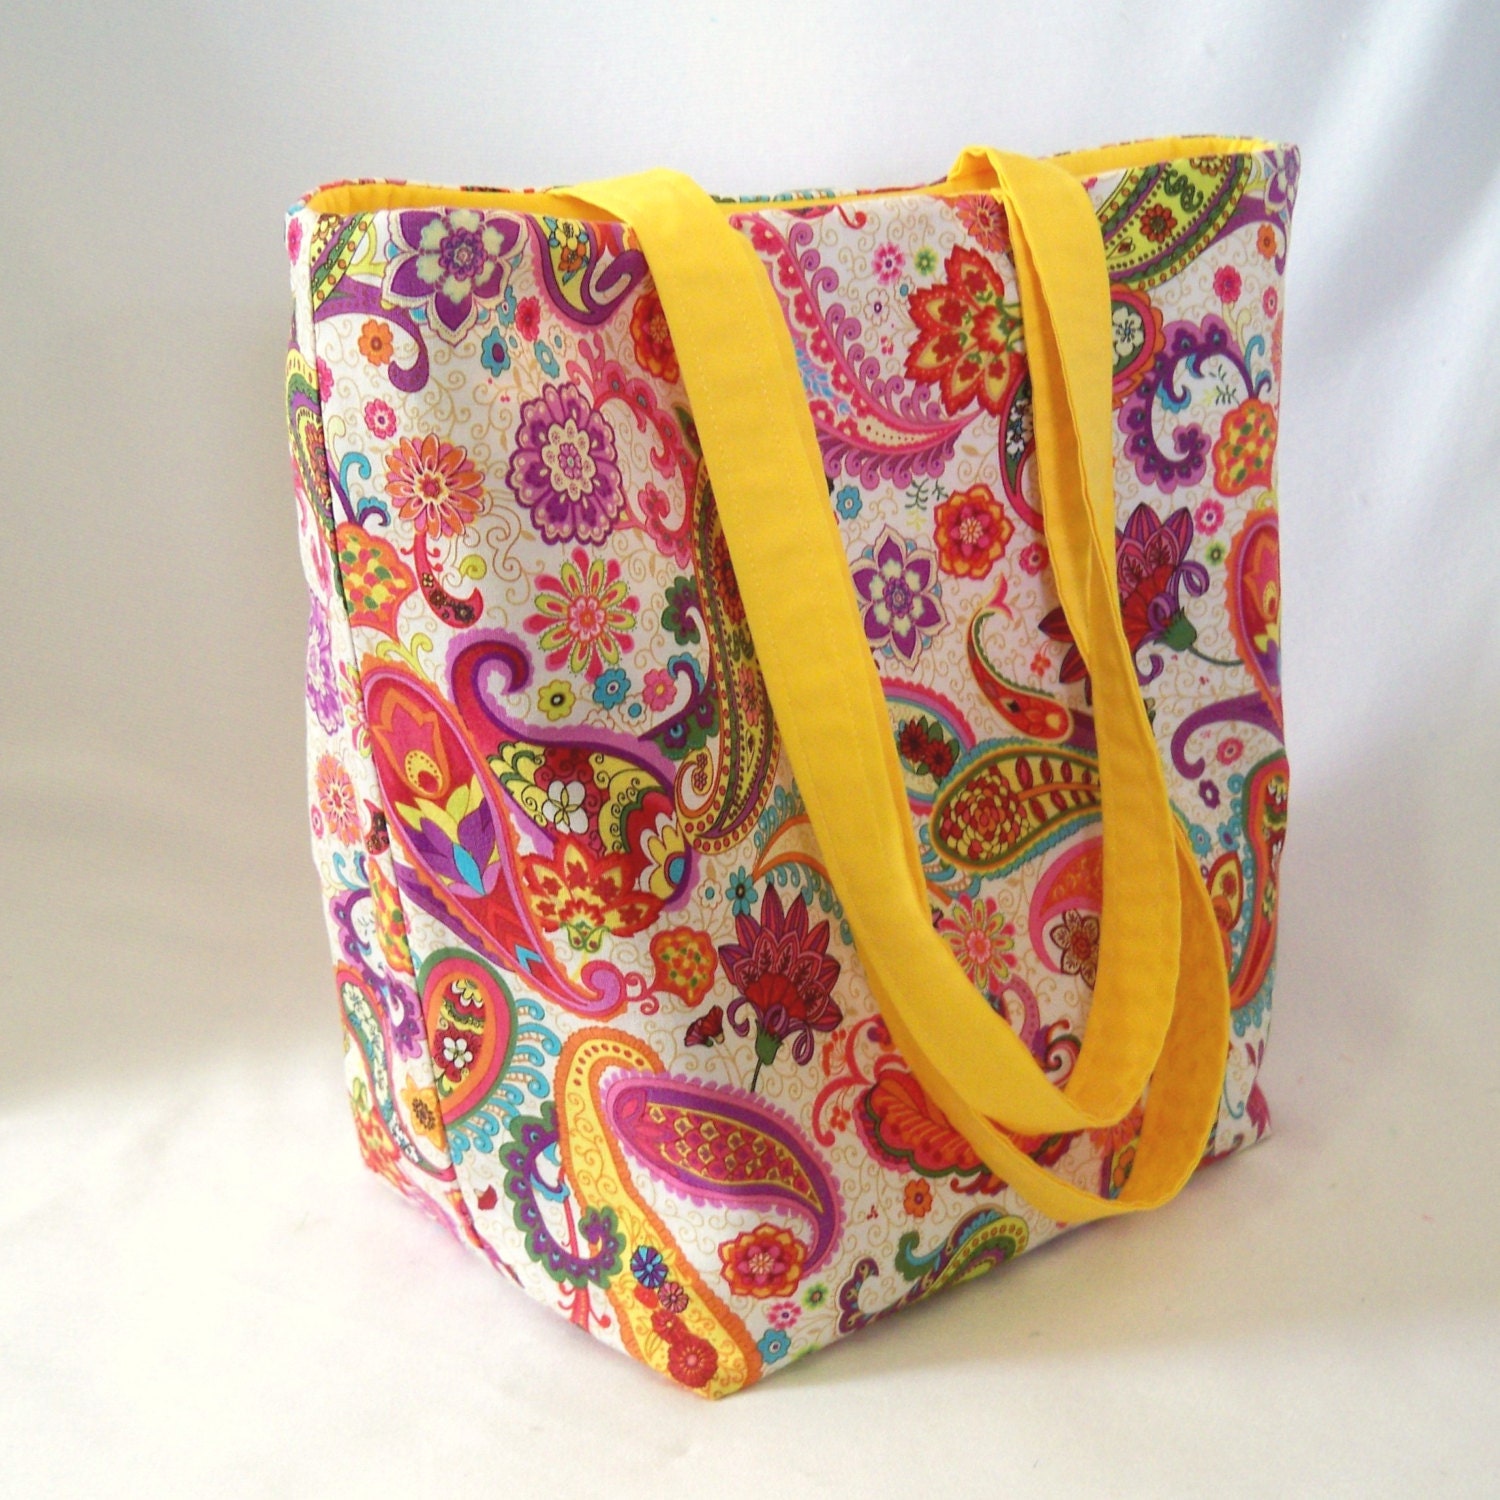 Paisley Tote Bag Fabric Purse Pink Purple by ColleensDesigns